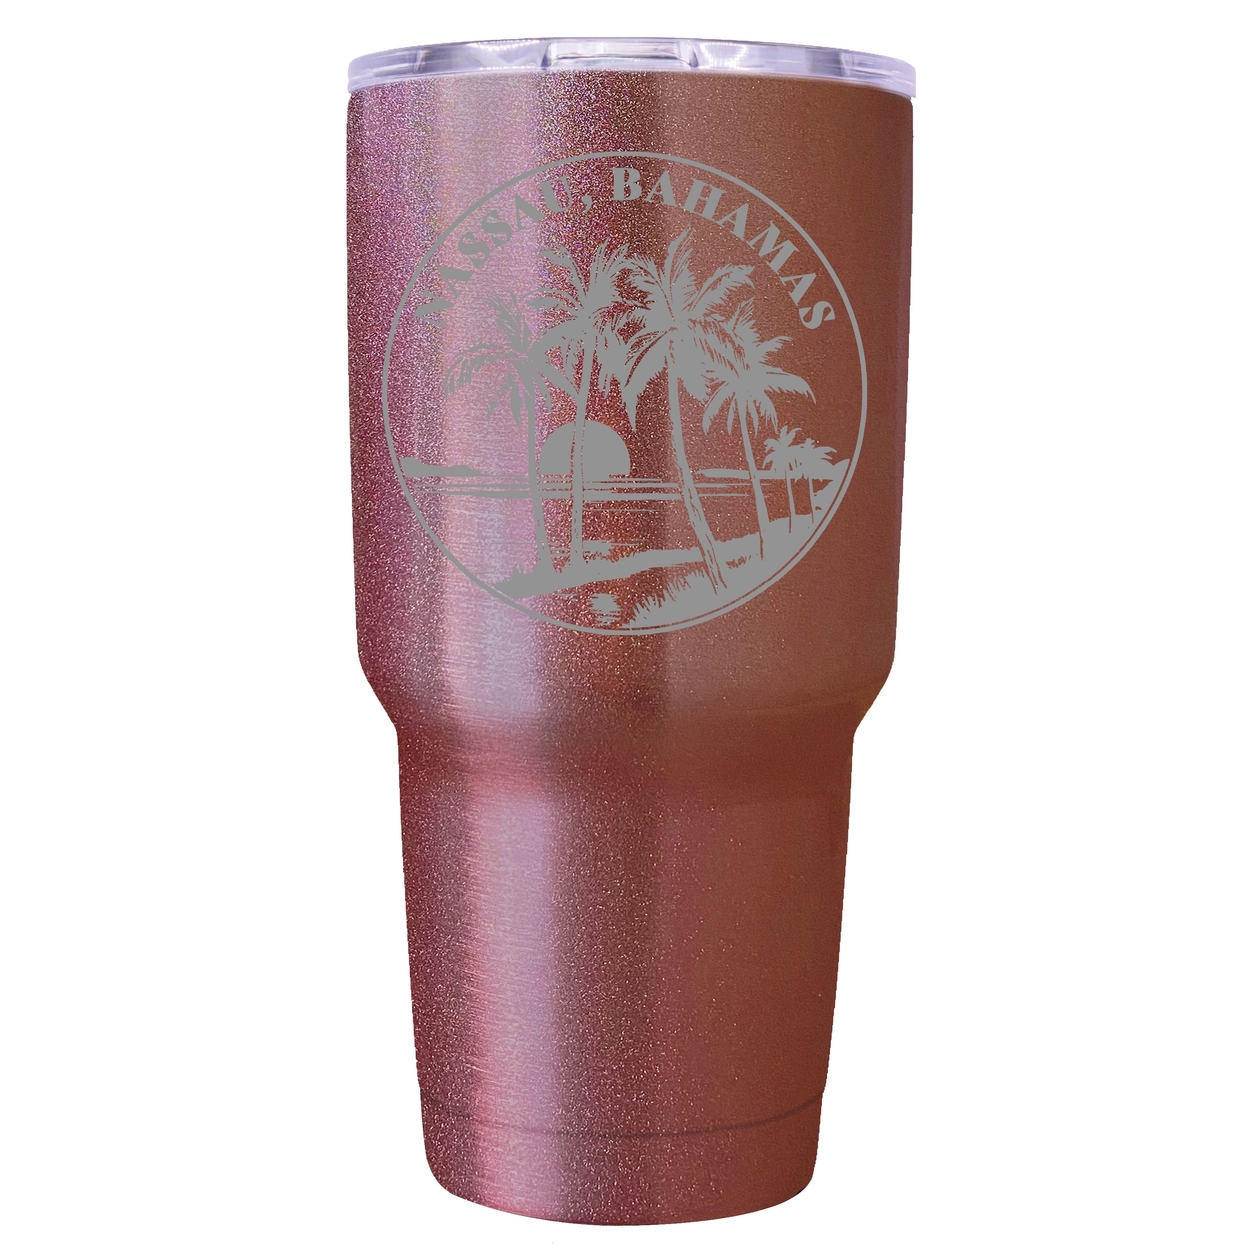 Nassau The Bahamas Souvenir 24 Oz Engraved Insulated Stainless Steel Tumbler - Seafoam,,4-Pack